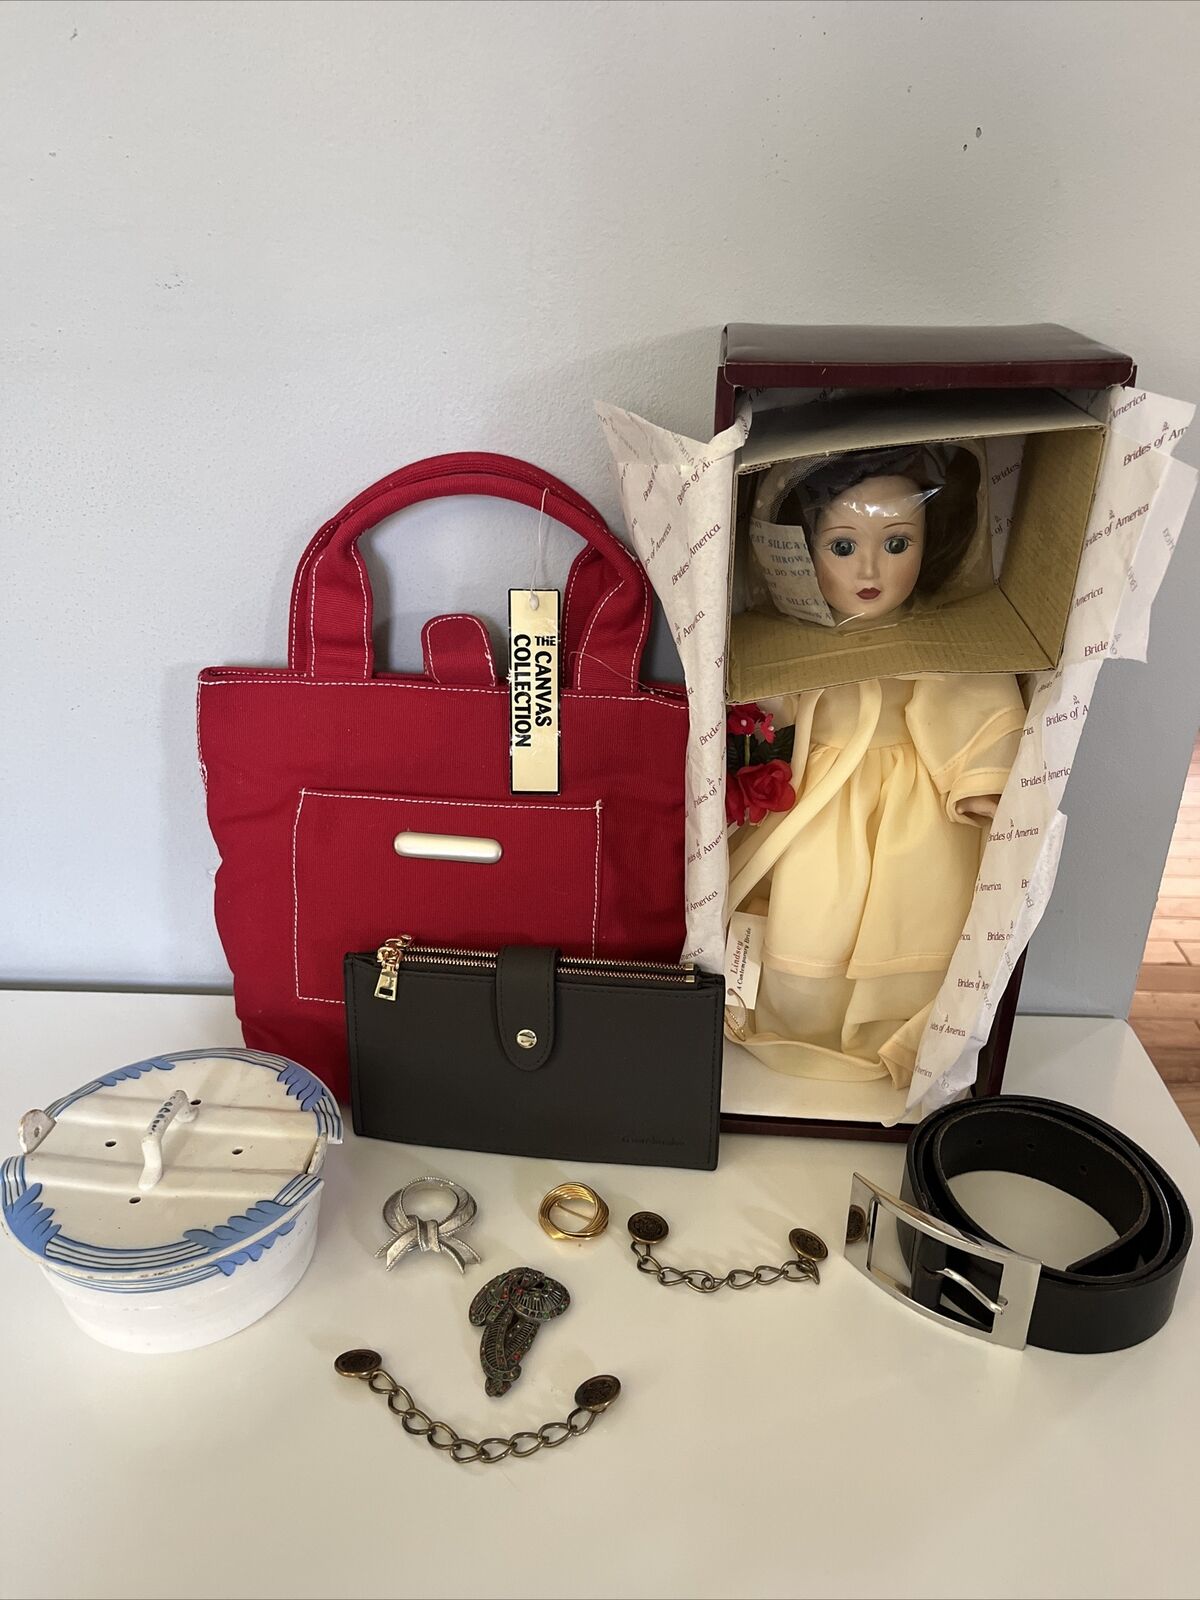 Grandma’s Vintage Estate Junk Drawer Lot Doll Bag And Much More